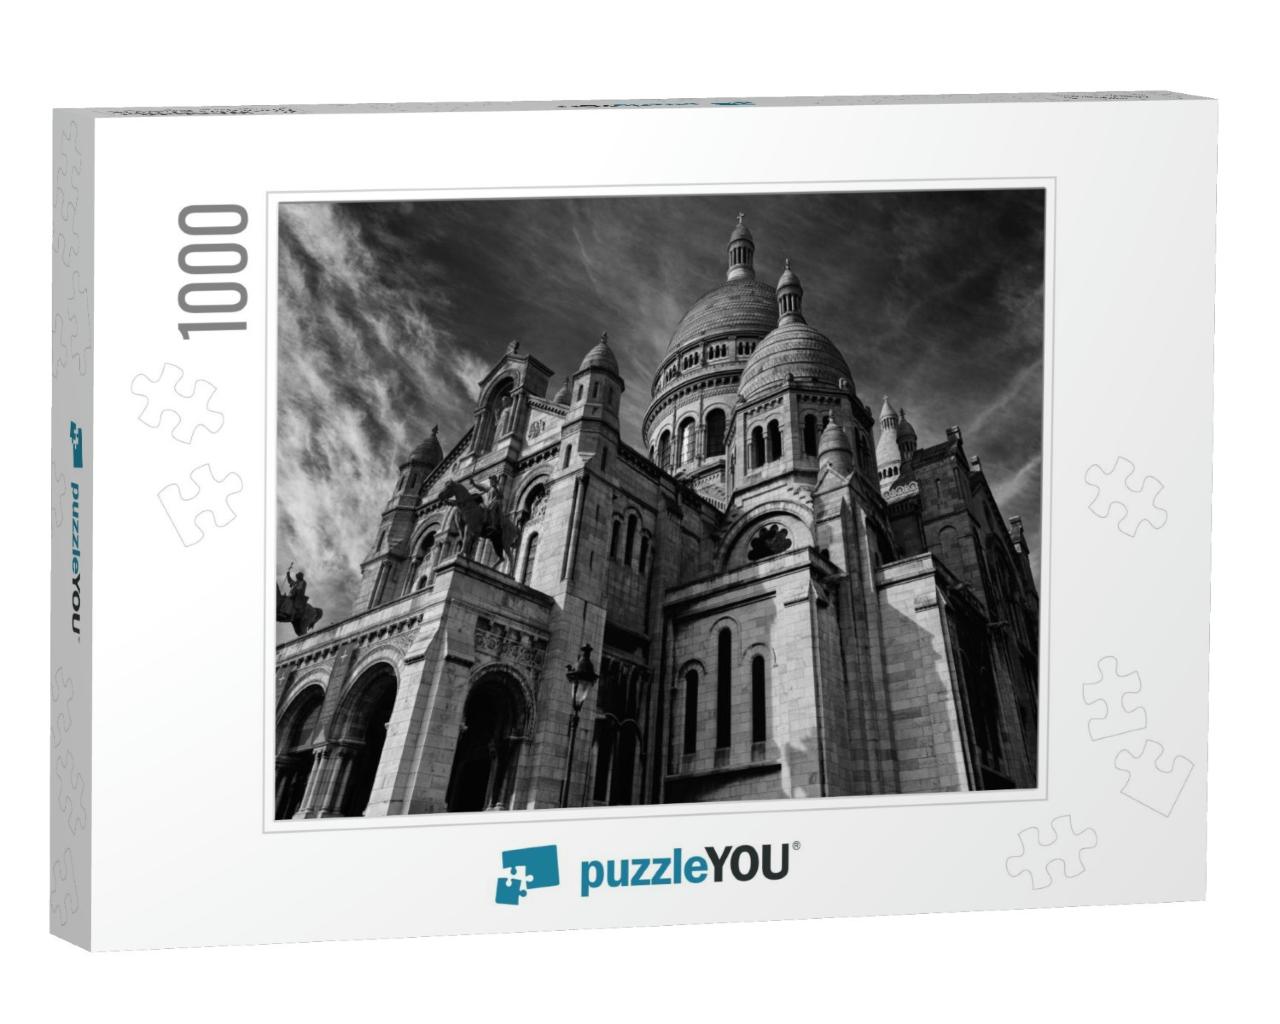 Monochrome Scenic & Dramatic Outdoor Architectural Image... Jigsaw Puzzle with 1000 pieces